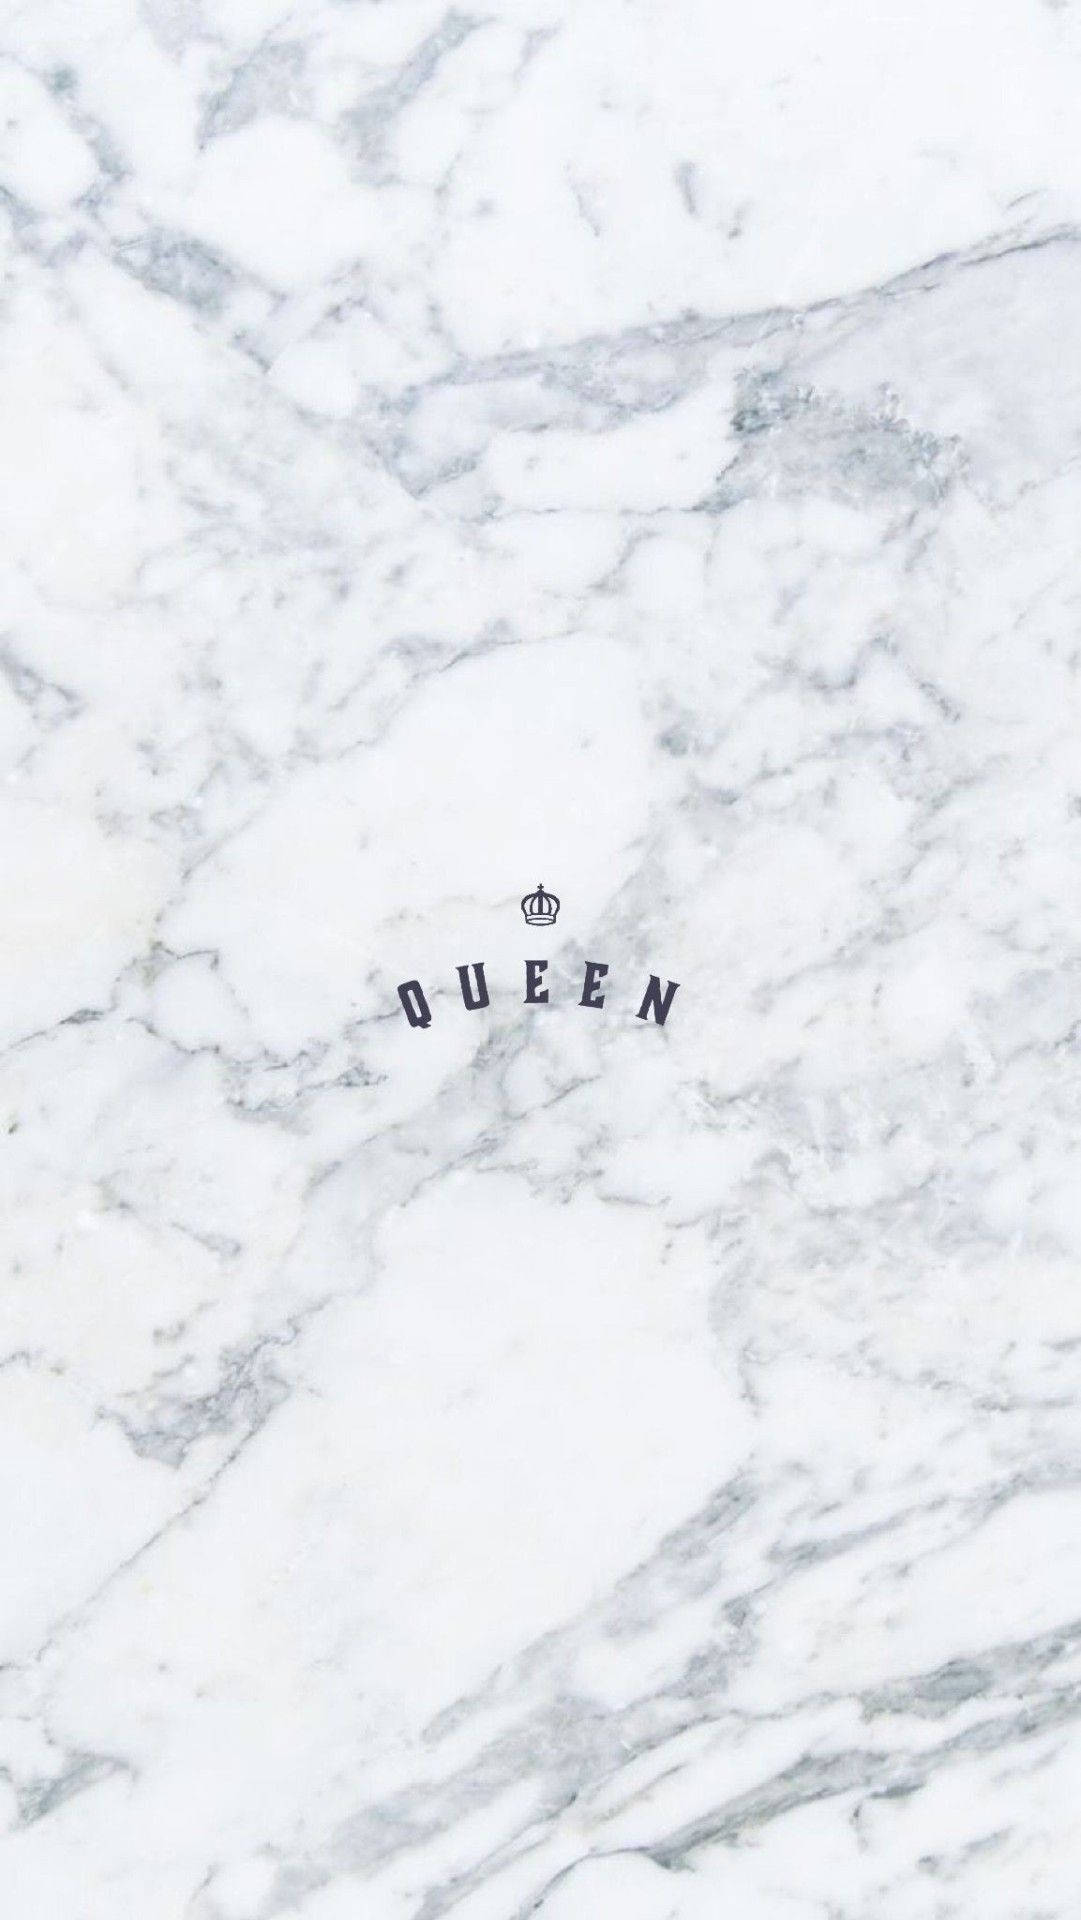 Cool Queen Black White Marble Iphone Wallpaper